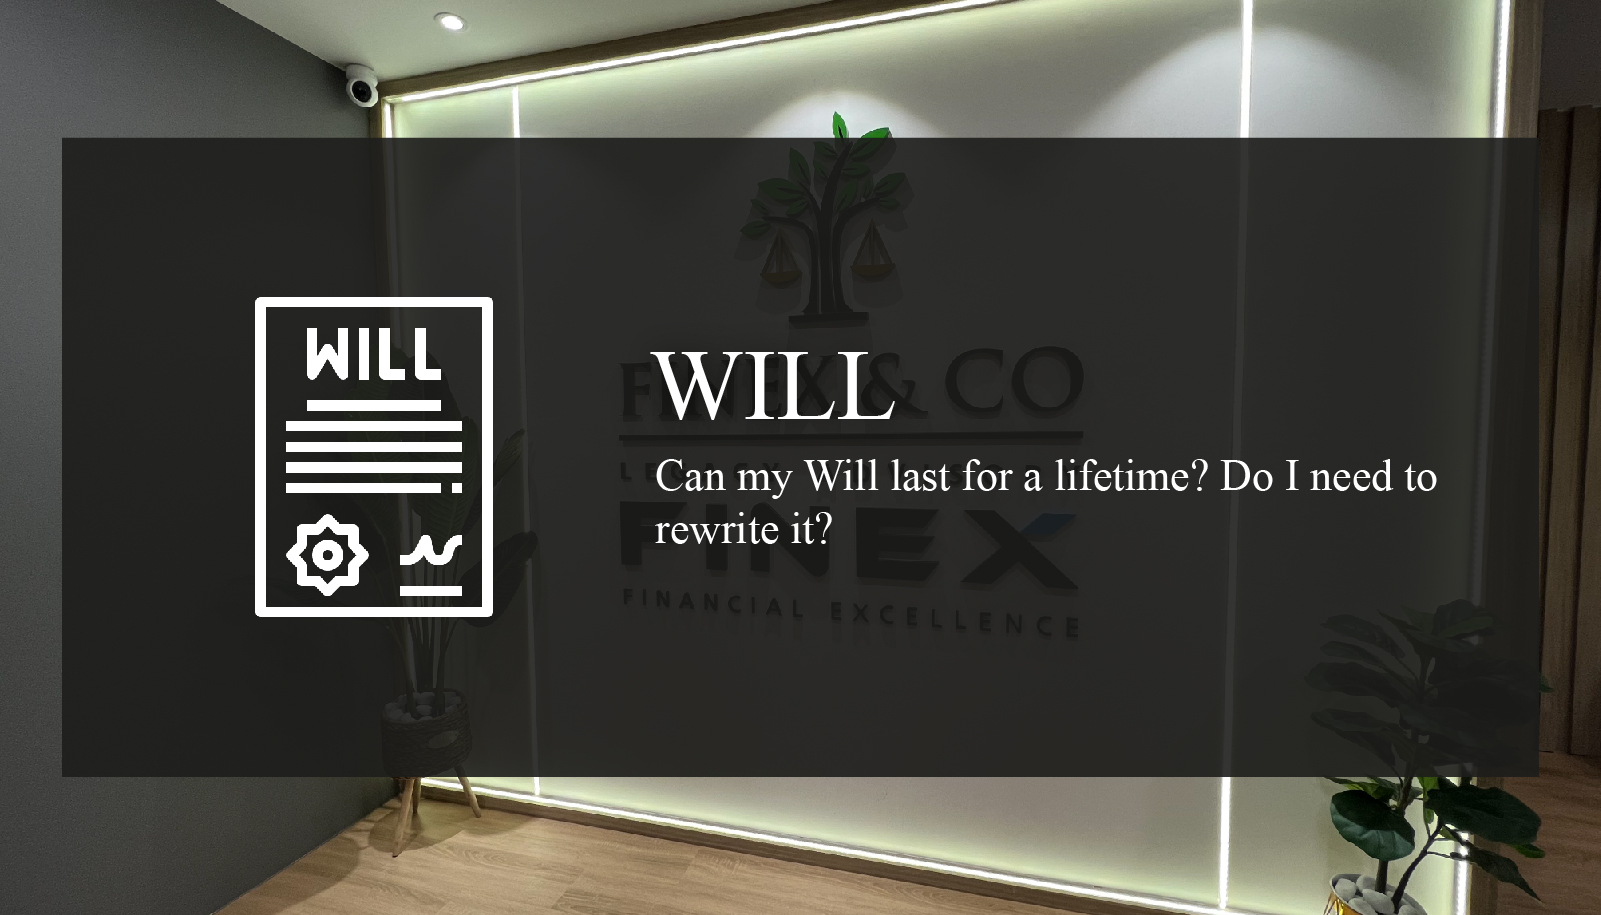 Can my Will last for a lifetime? Do I need to rewrite it?